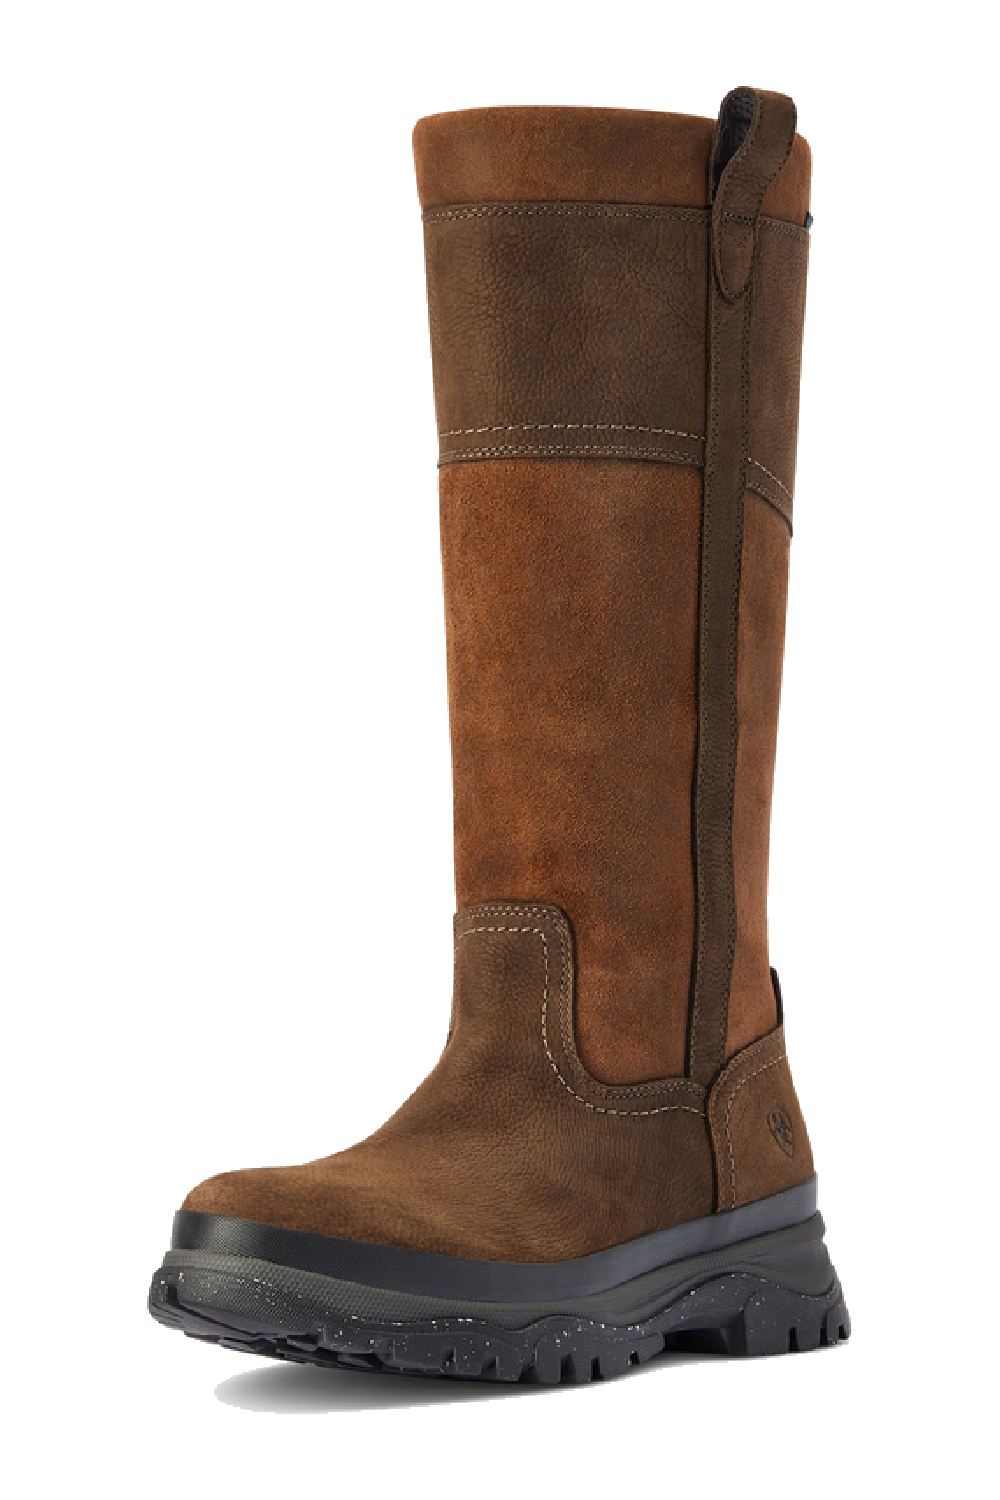 Ariat Moresby Tall H20 Java Country Boot